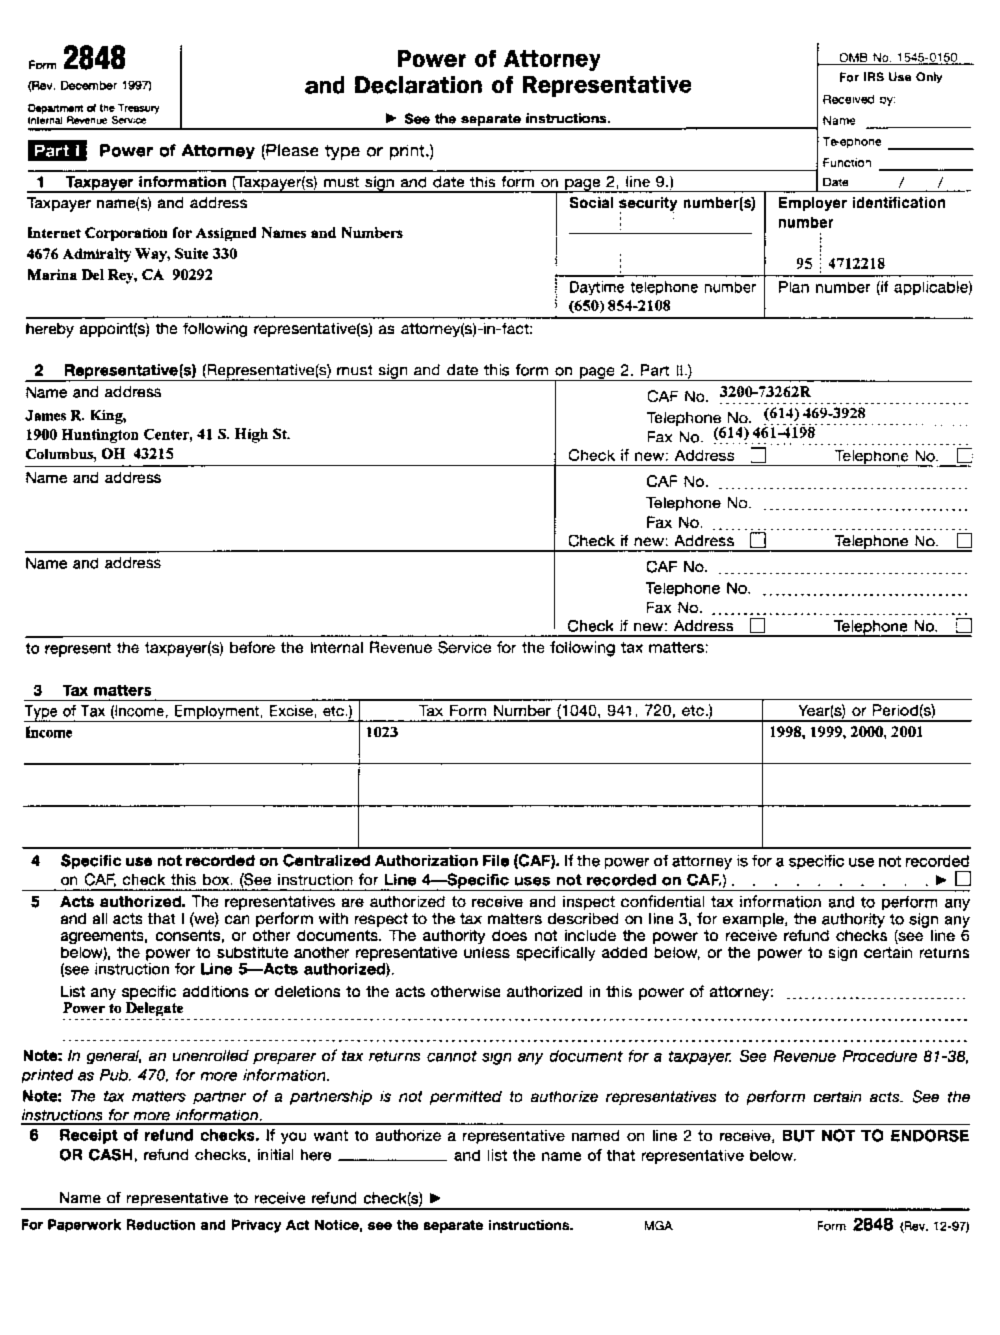 ICANN | Application for Tax-Exempt Status (U.S.) | Form 2848 Page 1